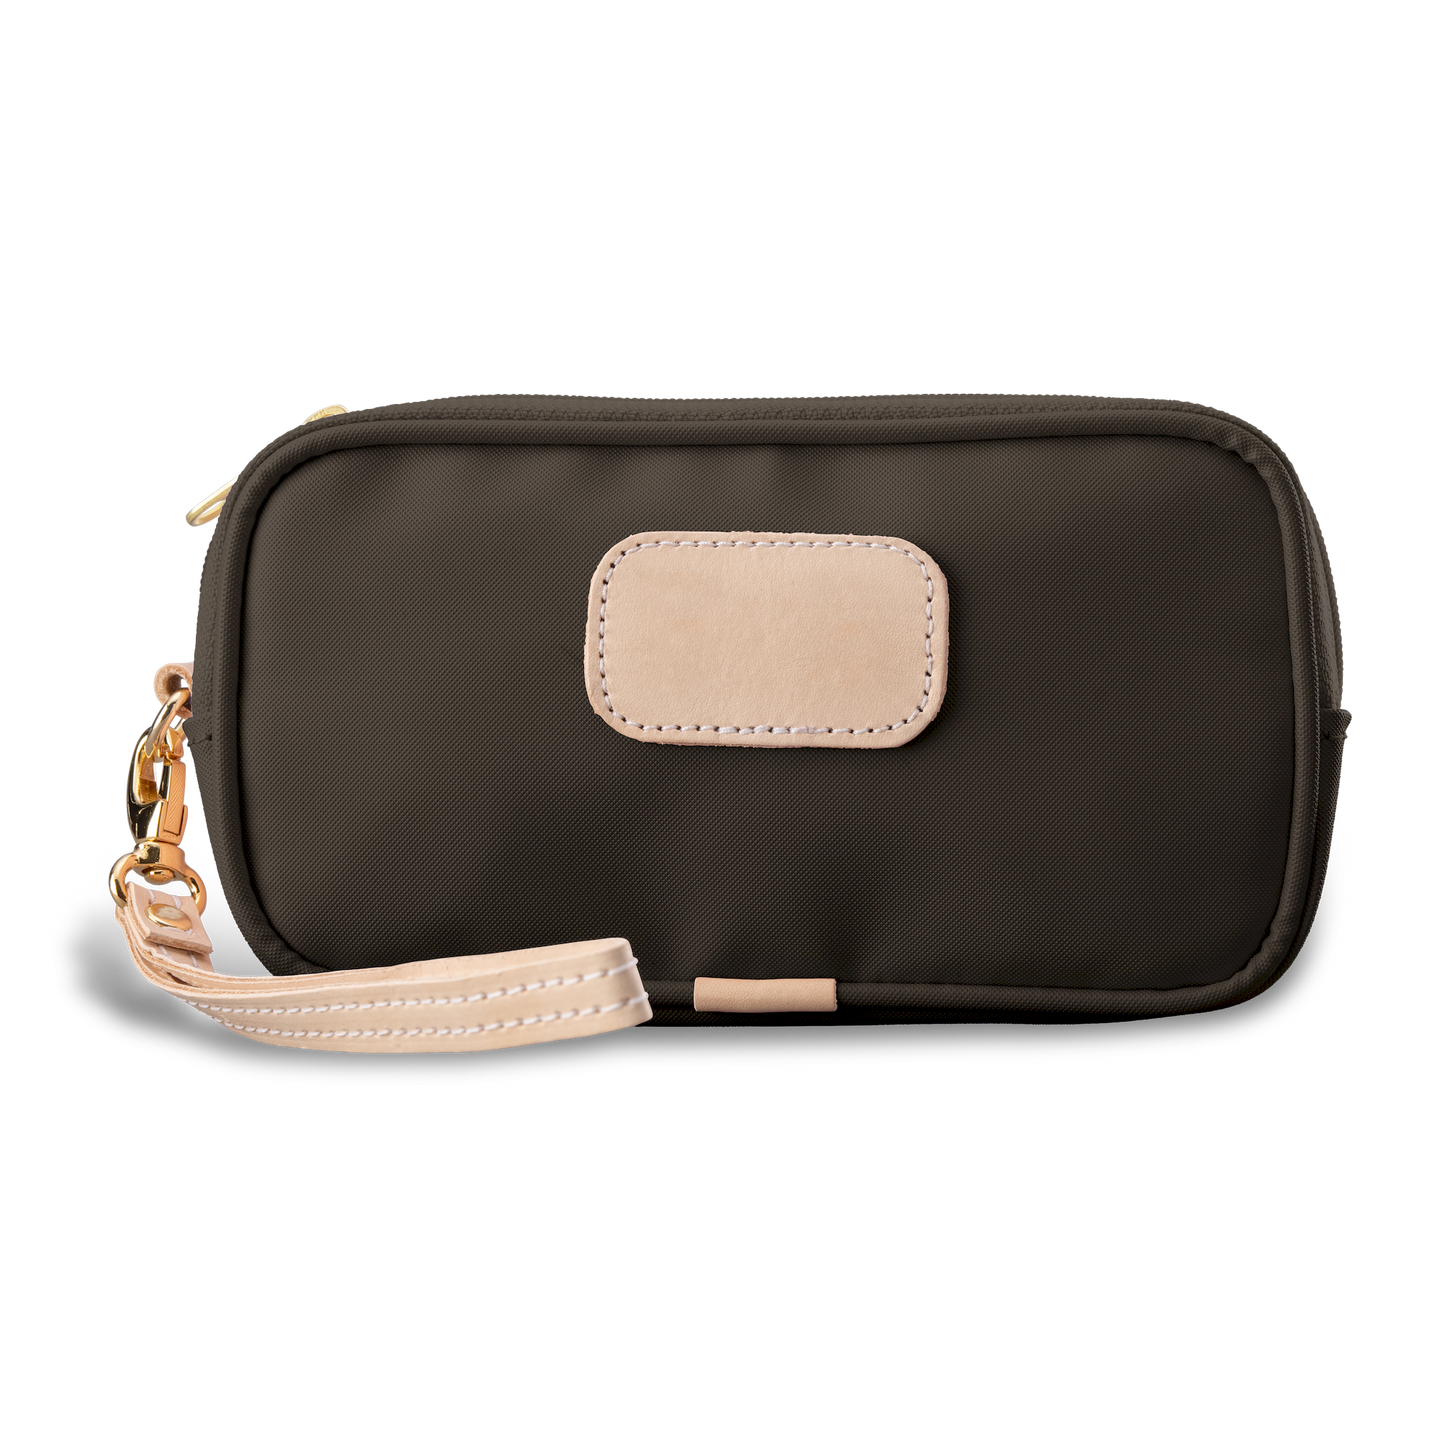 Wristlet - Espresso Coated Canvas Front Angle in Color 'Espresso Coated Canvas'